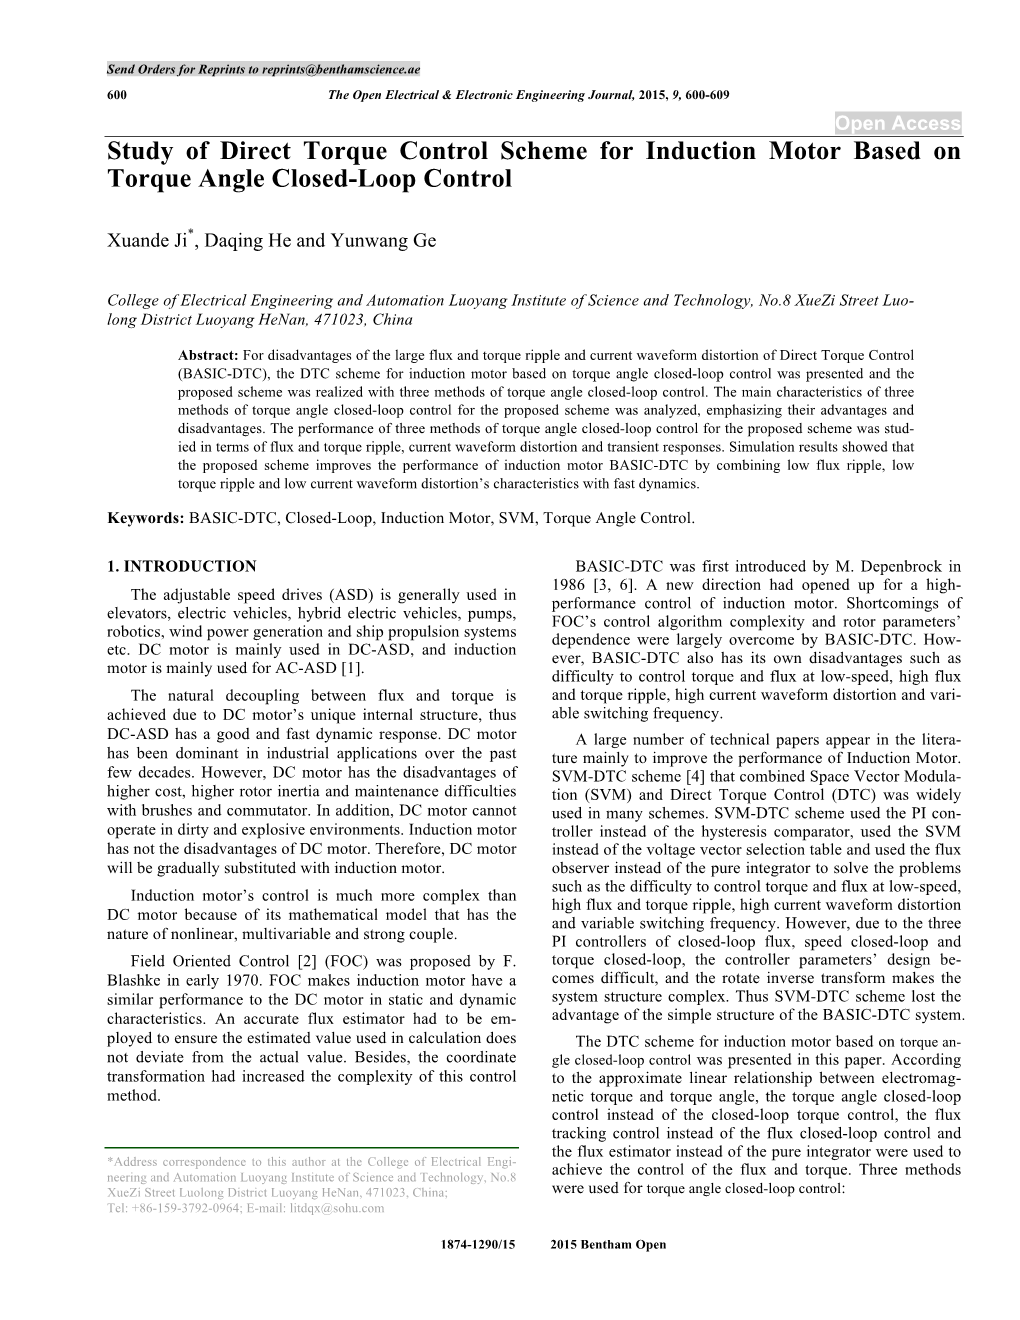 Study of Direct Torque Control Scheme for Induction Motor Based on Torque Angle Closed-Loop Control